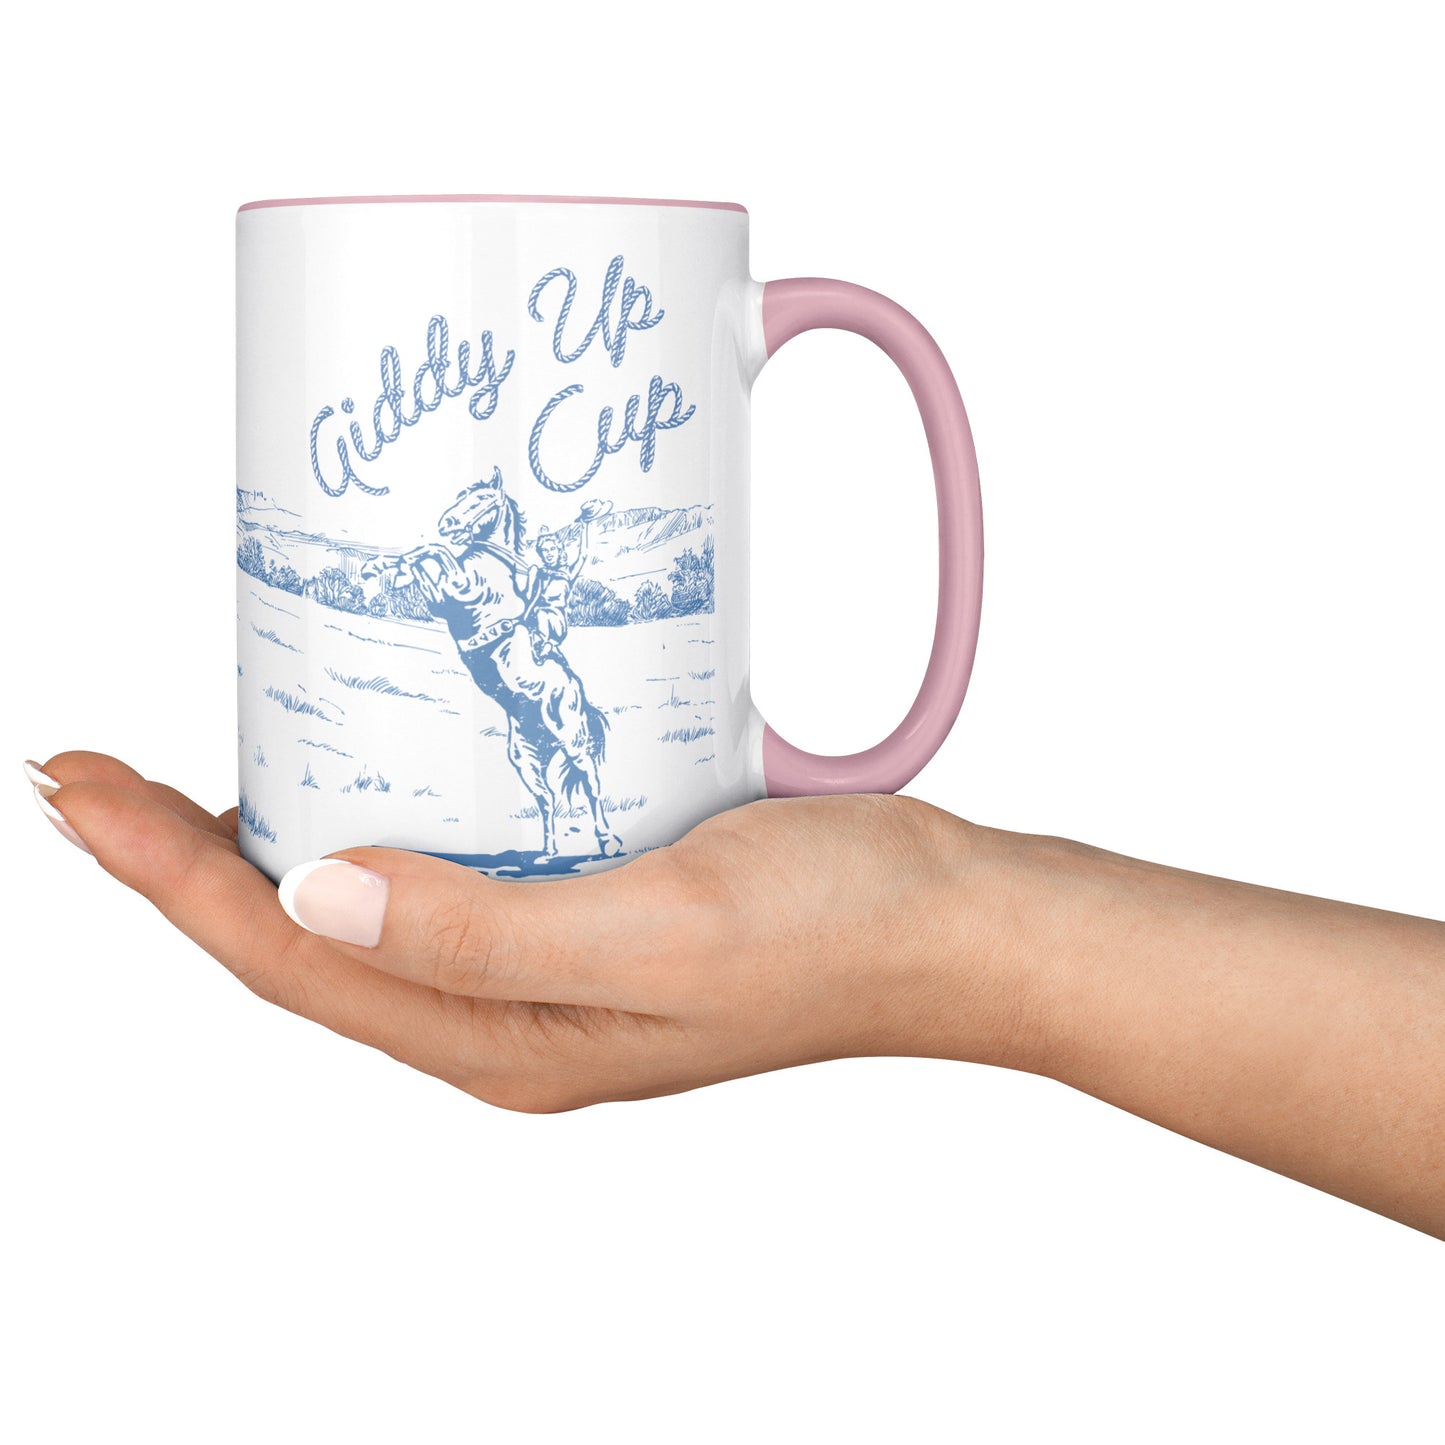 GIDDY UP CUP - Pink Handle - Purple + Blue Art